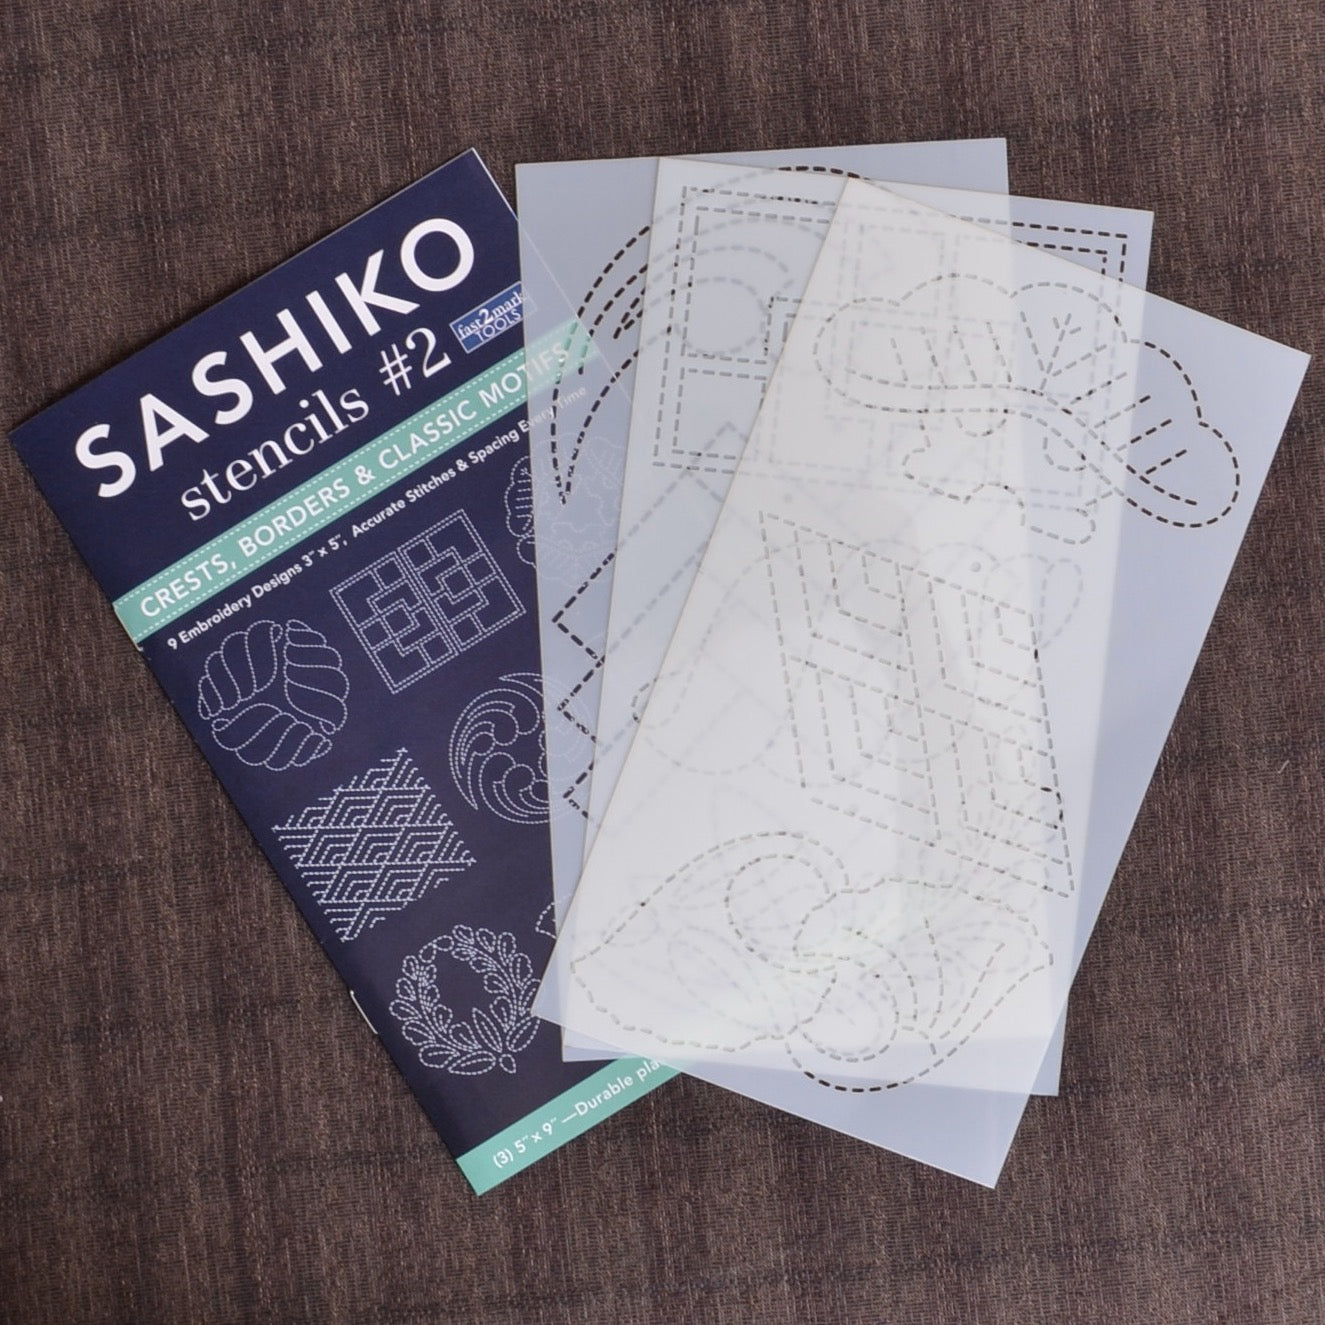 Sashiko Stencils Embroidery Patterns or Quilting Stencils Sashiko Templates  Collection A small Size -  Norway